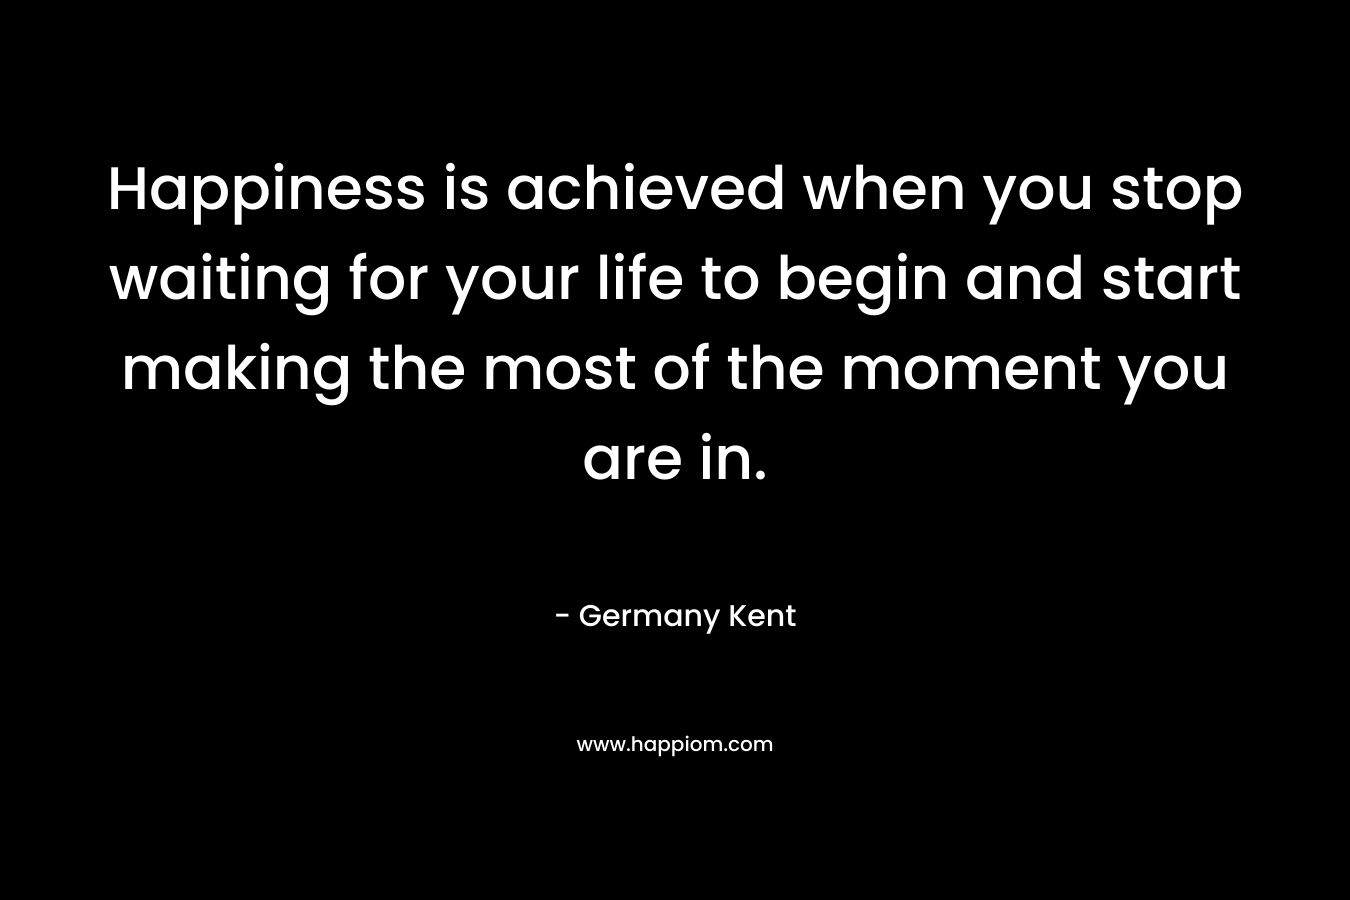 Happiness is achieved when you stop waiting for your life to begin and start making the most of the moment you are in. – Germany Kent